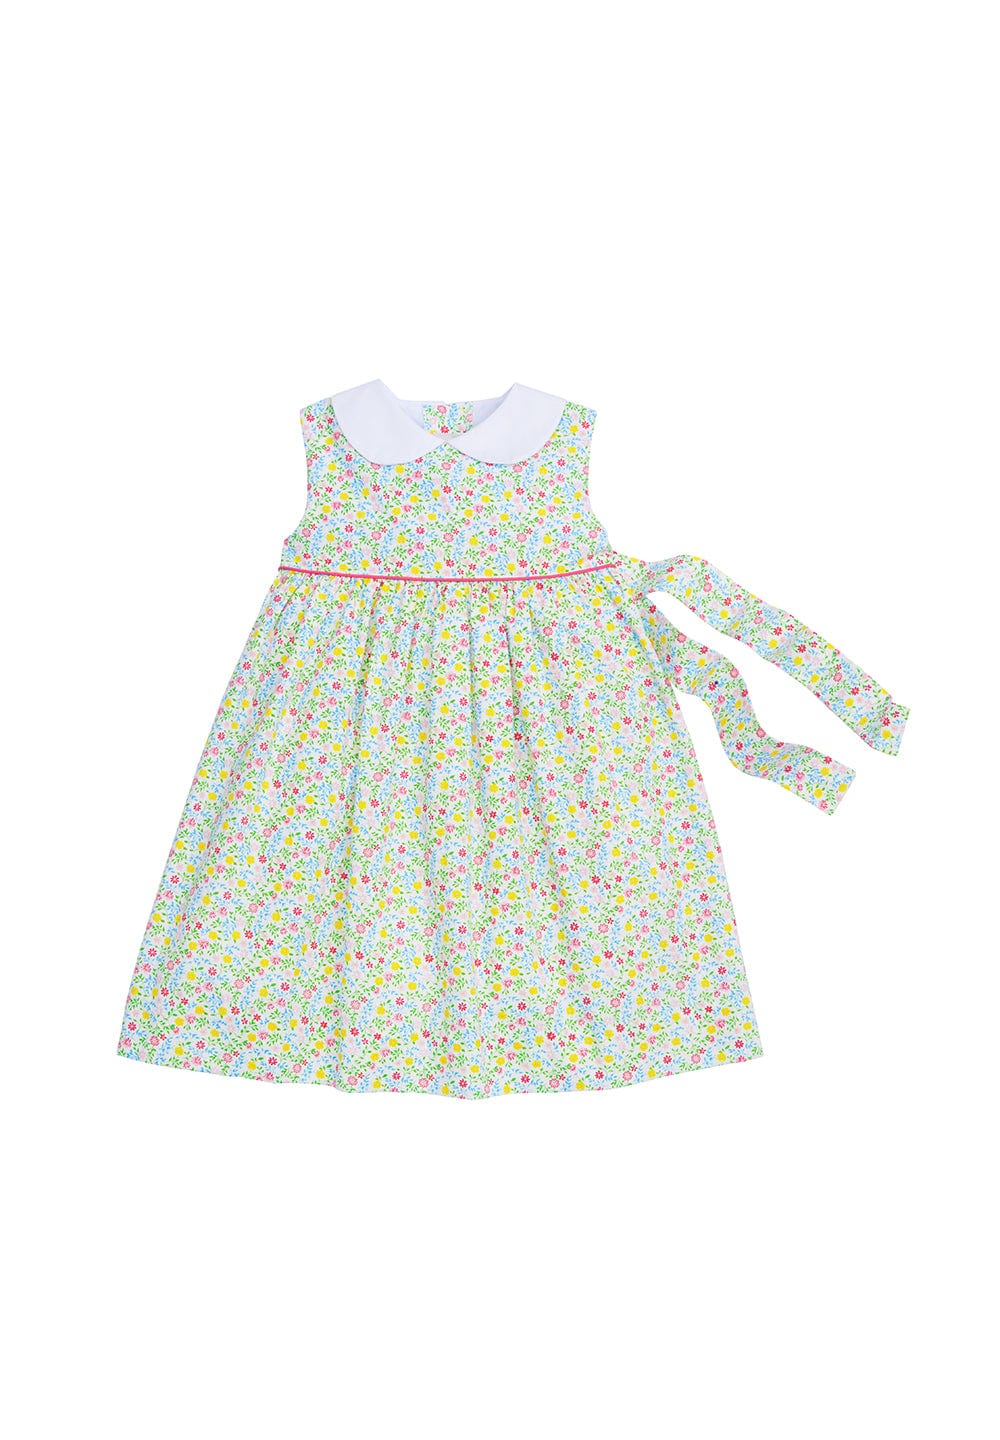 classic childrens clothing girls bright floral dress with peter pan collar